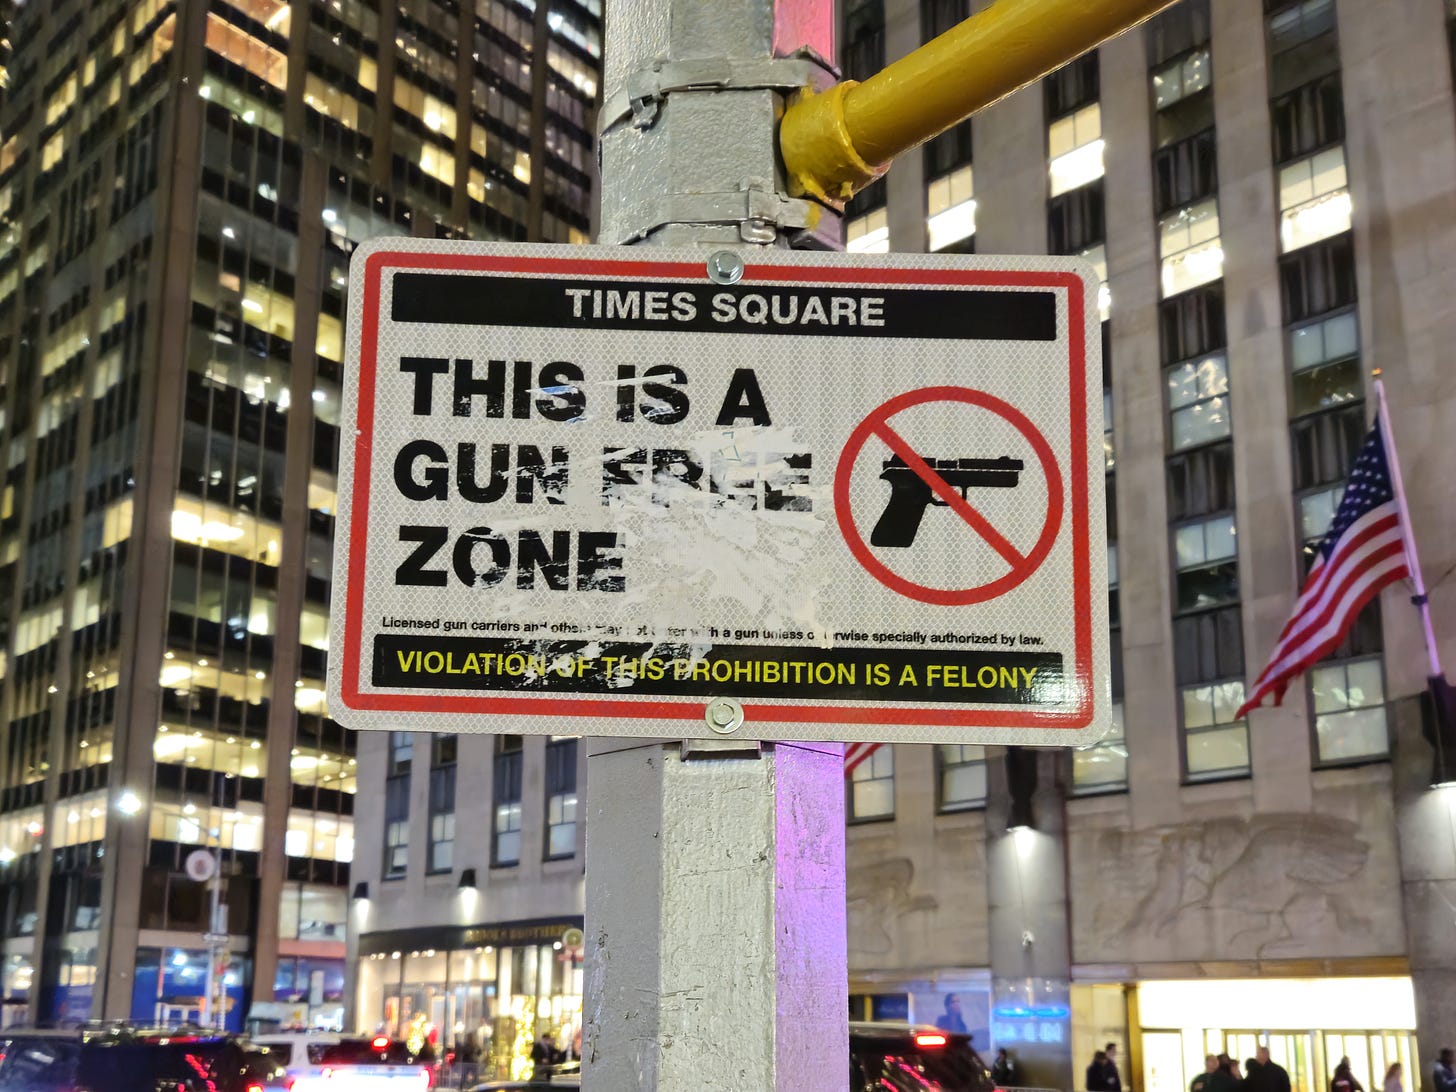 A sign that says Times Square, This is a Gun Free Zone, and Violation of this Prohibition is a Felony. There is also an image of a gun inside a red circle with a line crossed through it.